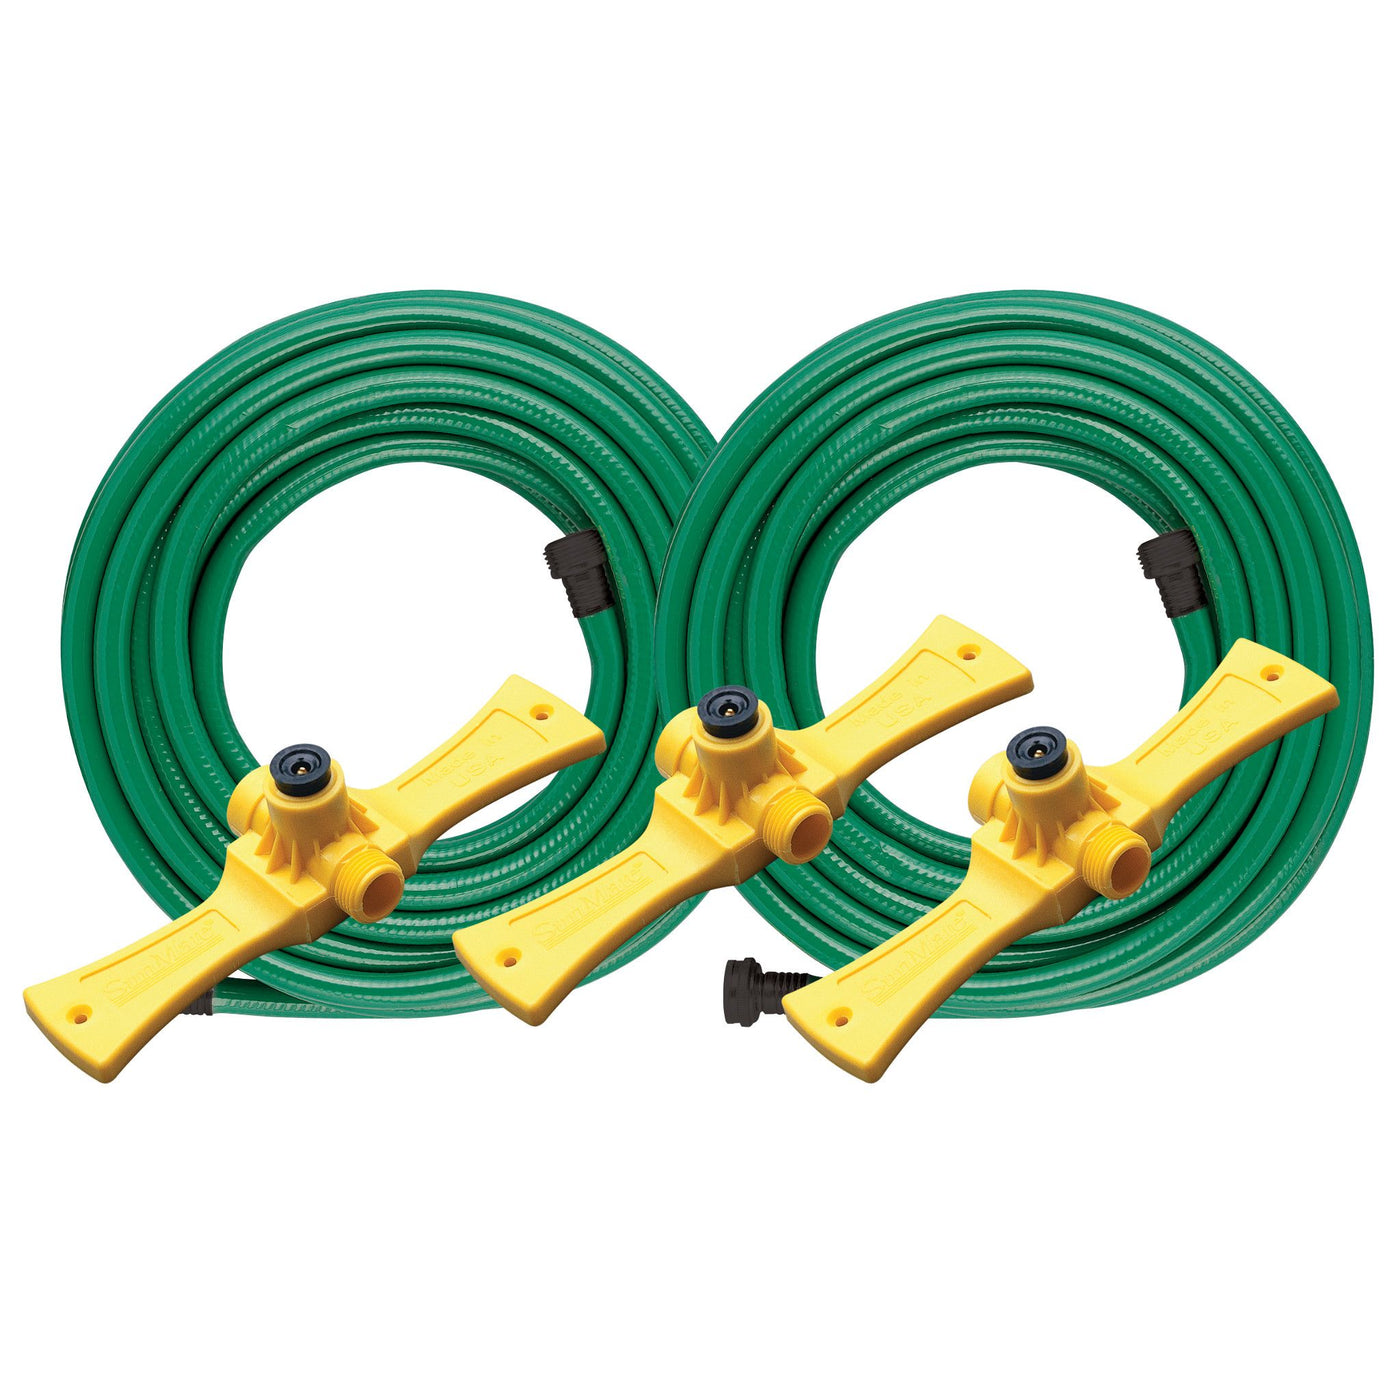 Port-A-Rain Hose Watering Sprinkler System with Fixed Nozzles